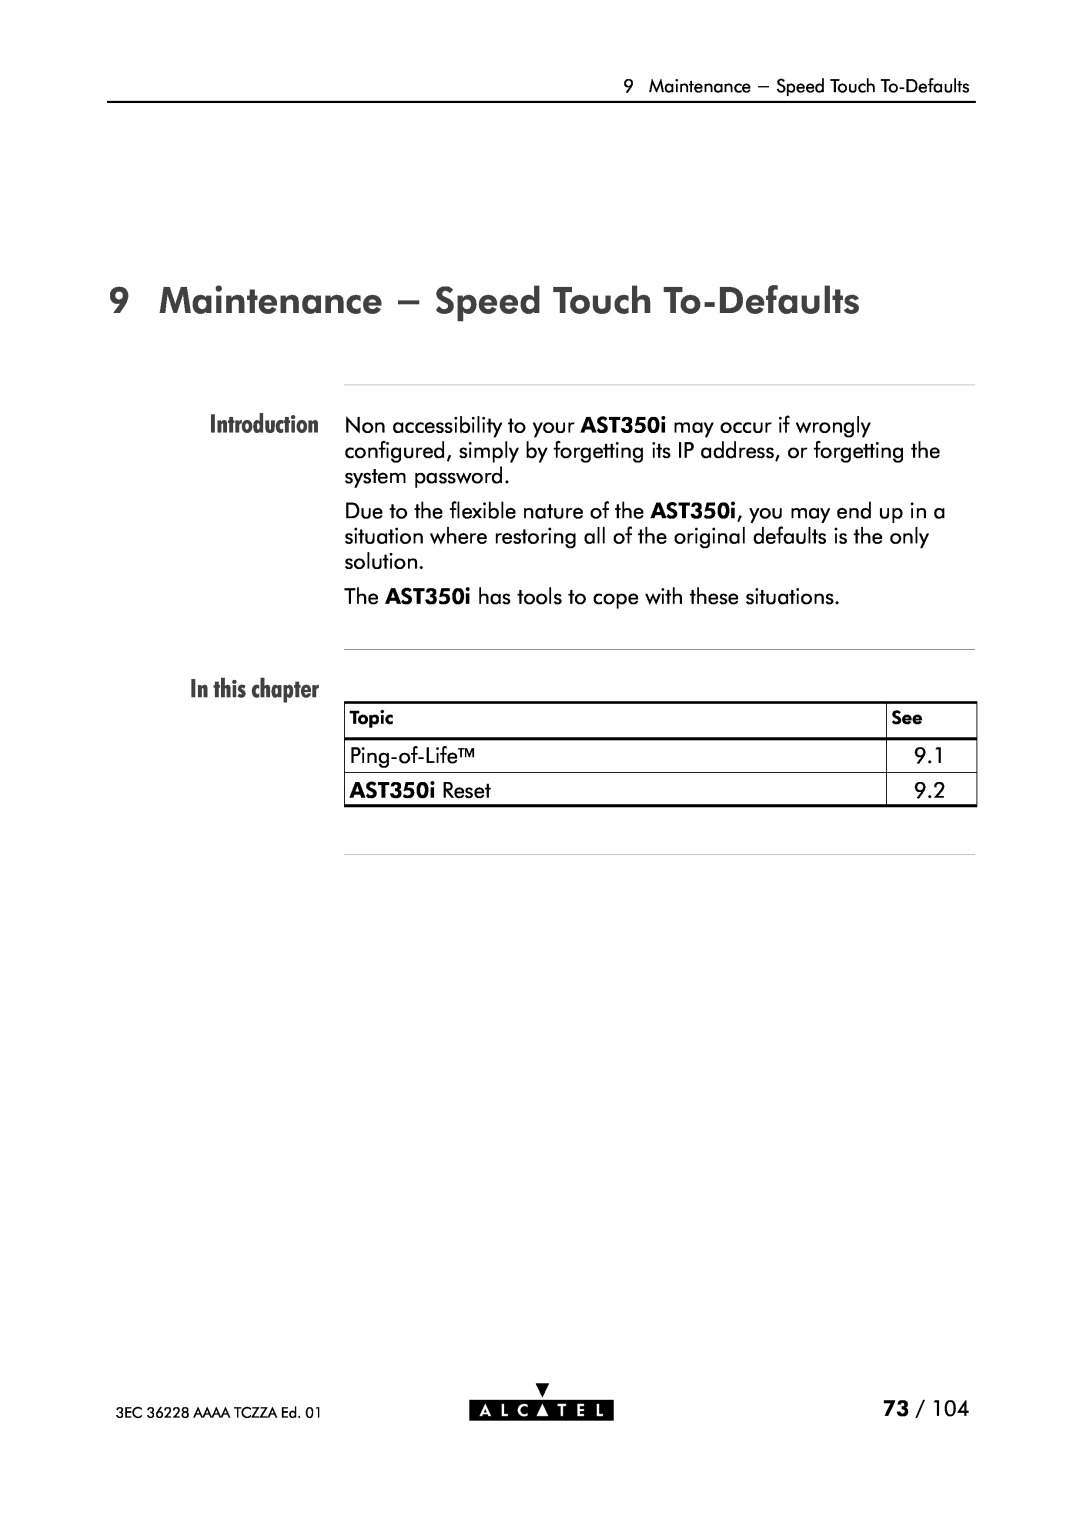 Alcatel Carrier Internetworking Solutions 350I manual Maintenance - Speed Touch ToDefaults, In this chapter 